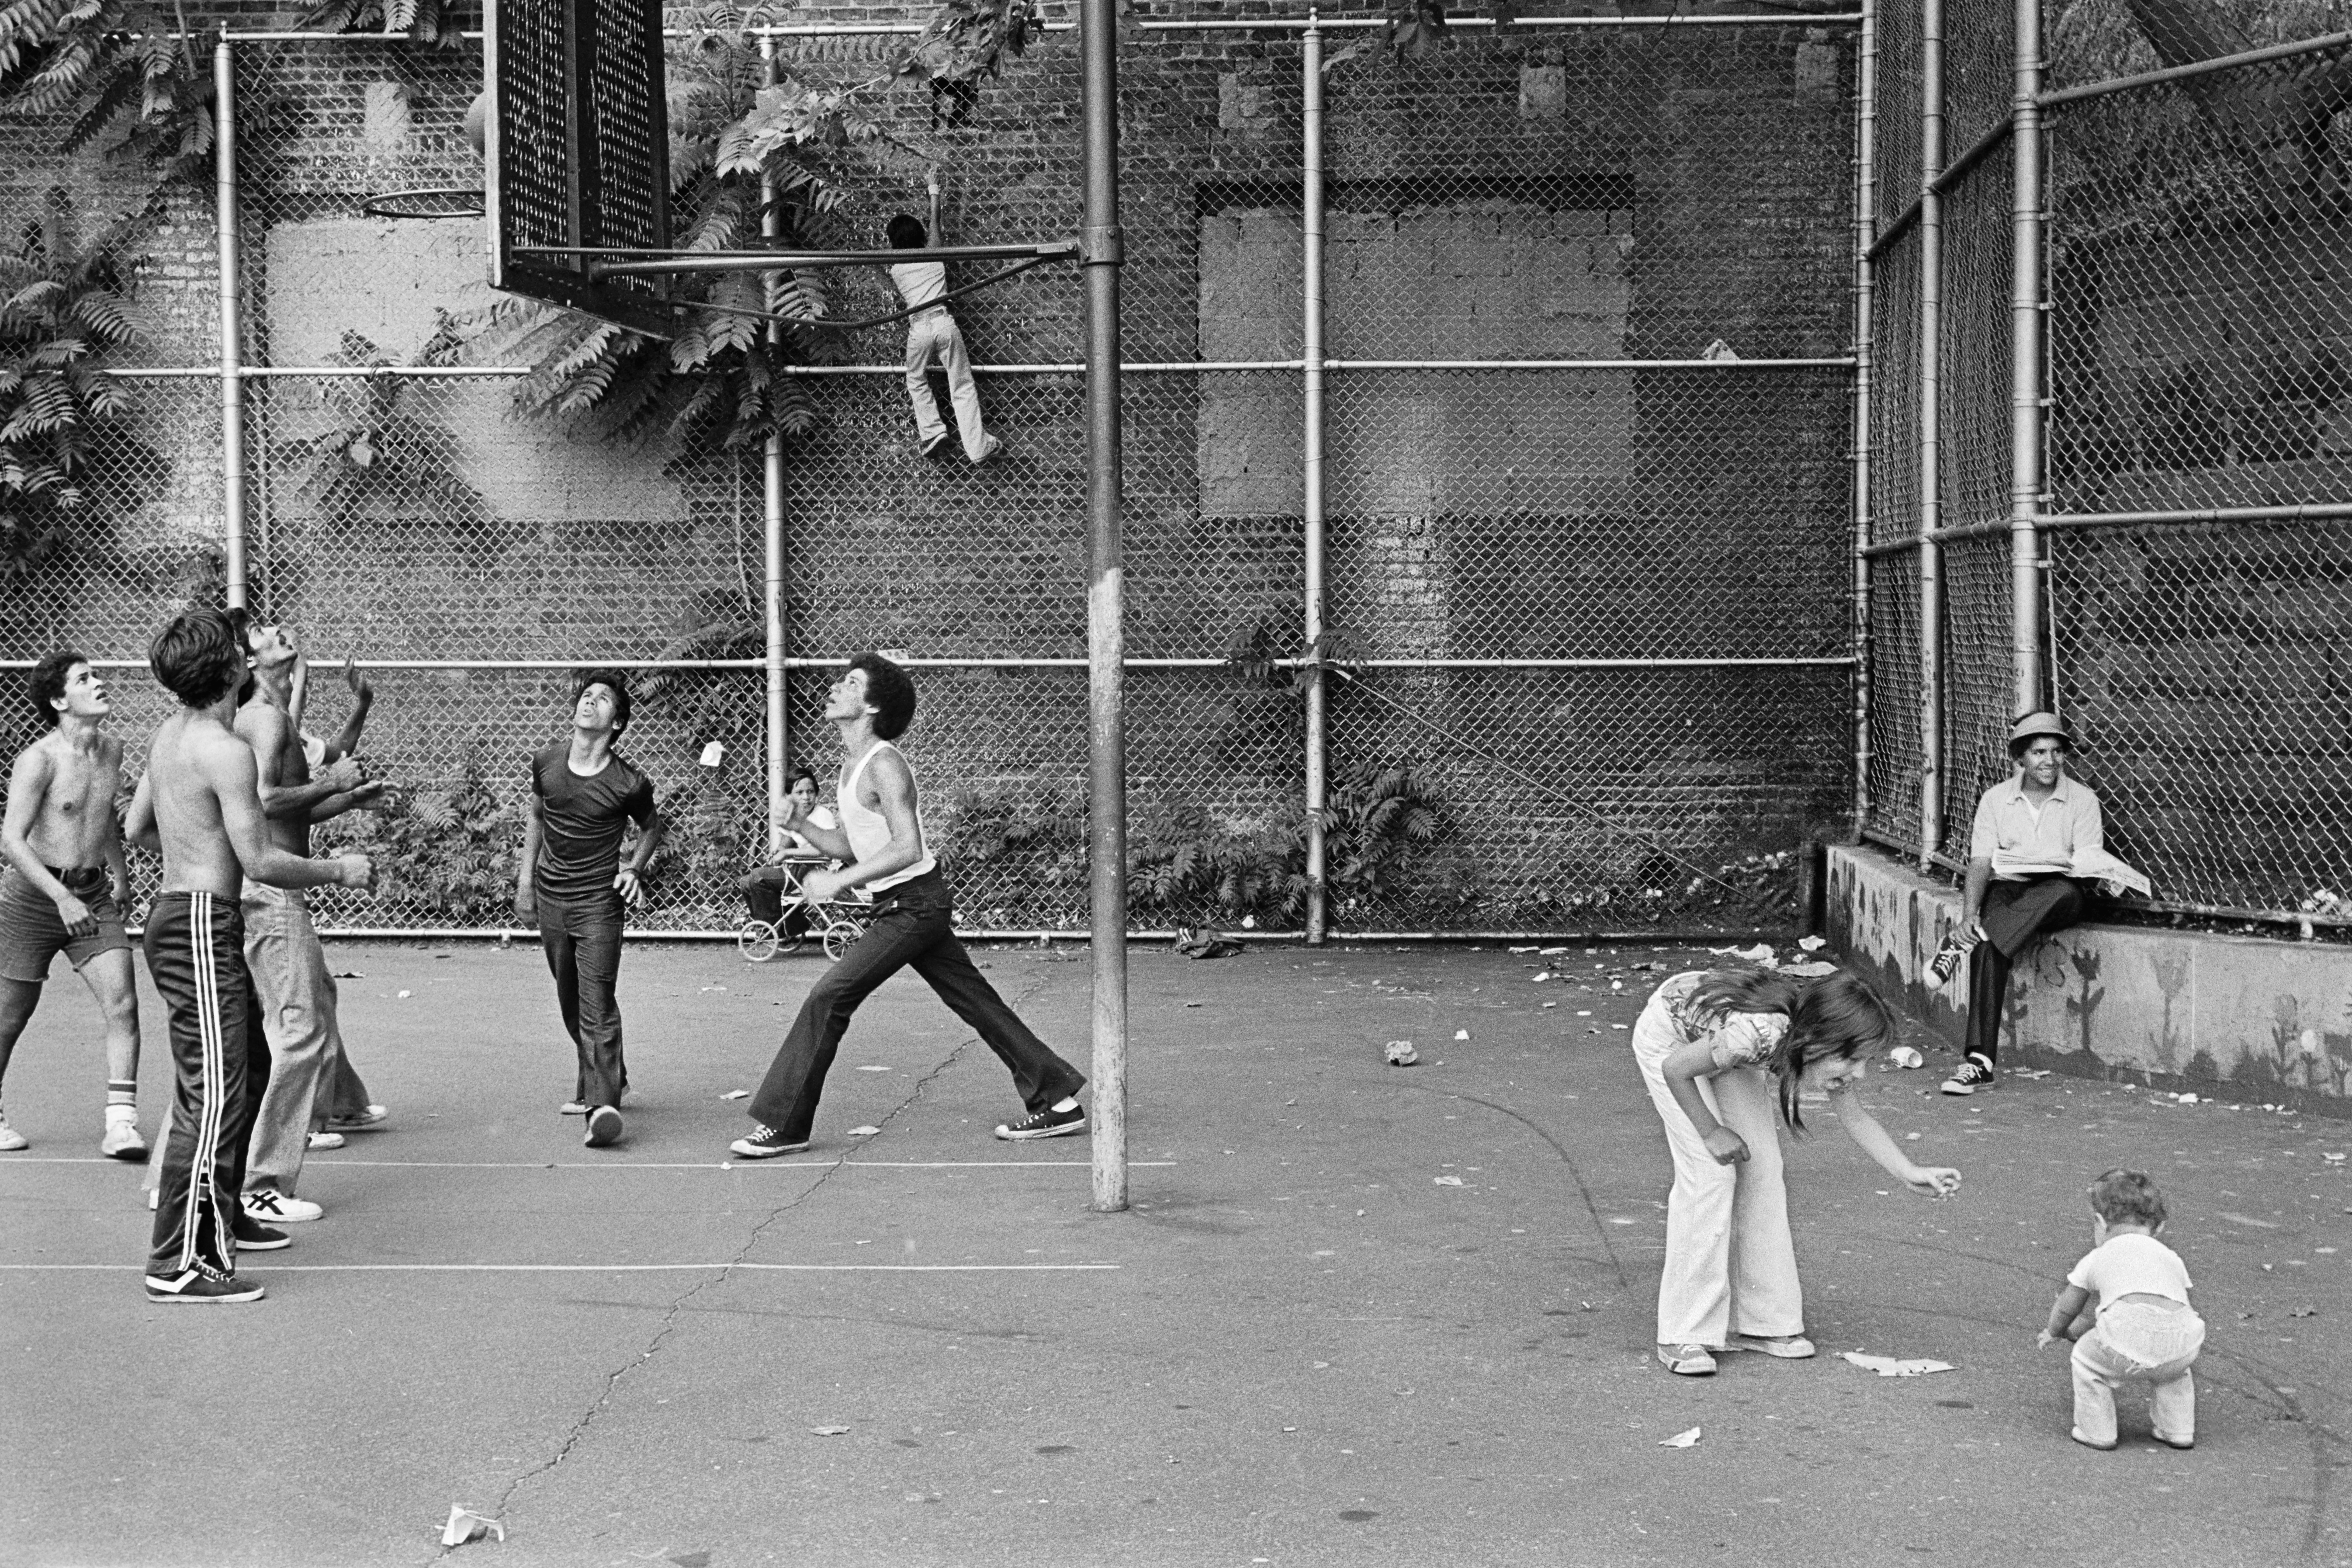 Photograph of people playing basketball in basketball court between two buildings, woman and child in front